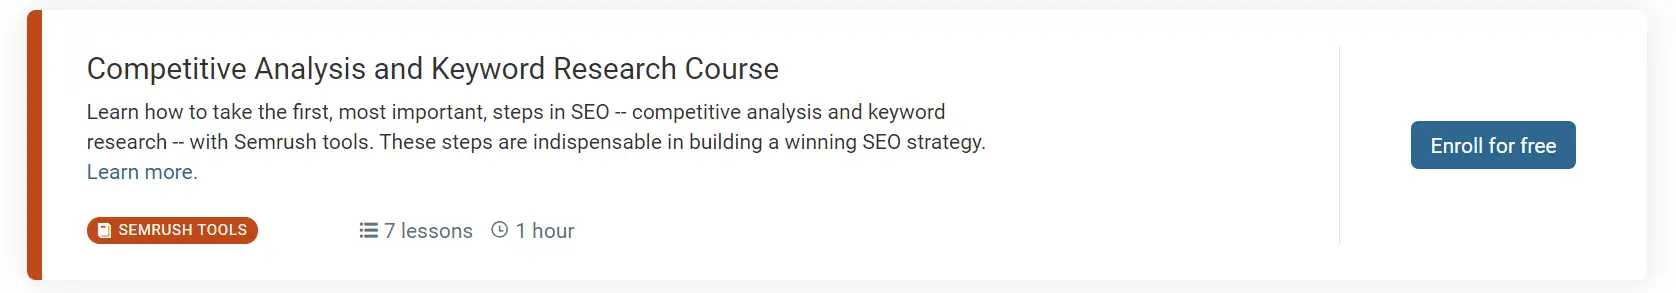 Keyword Research Courses